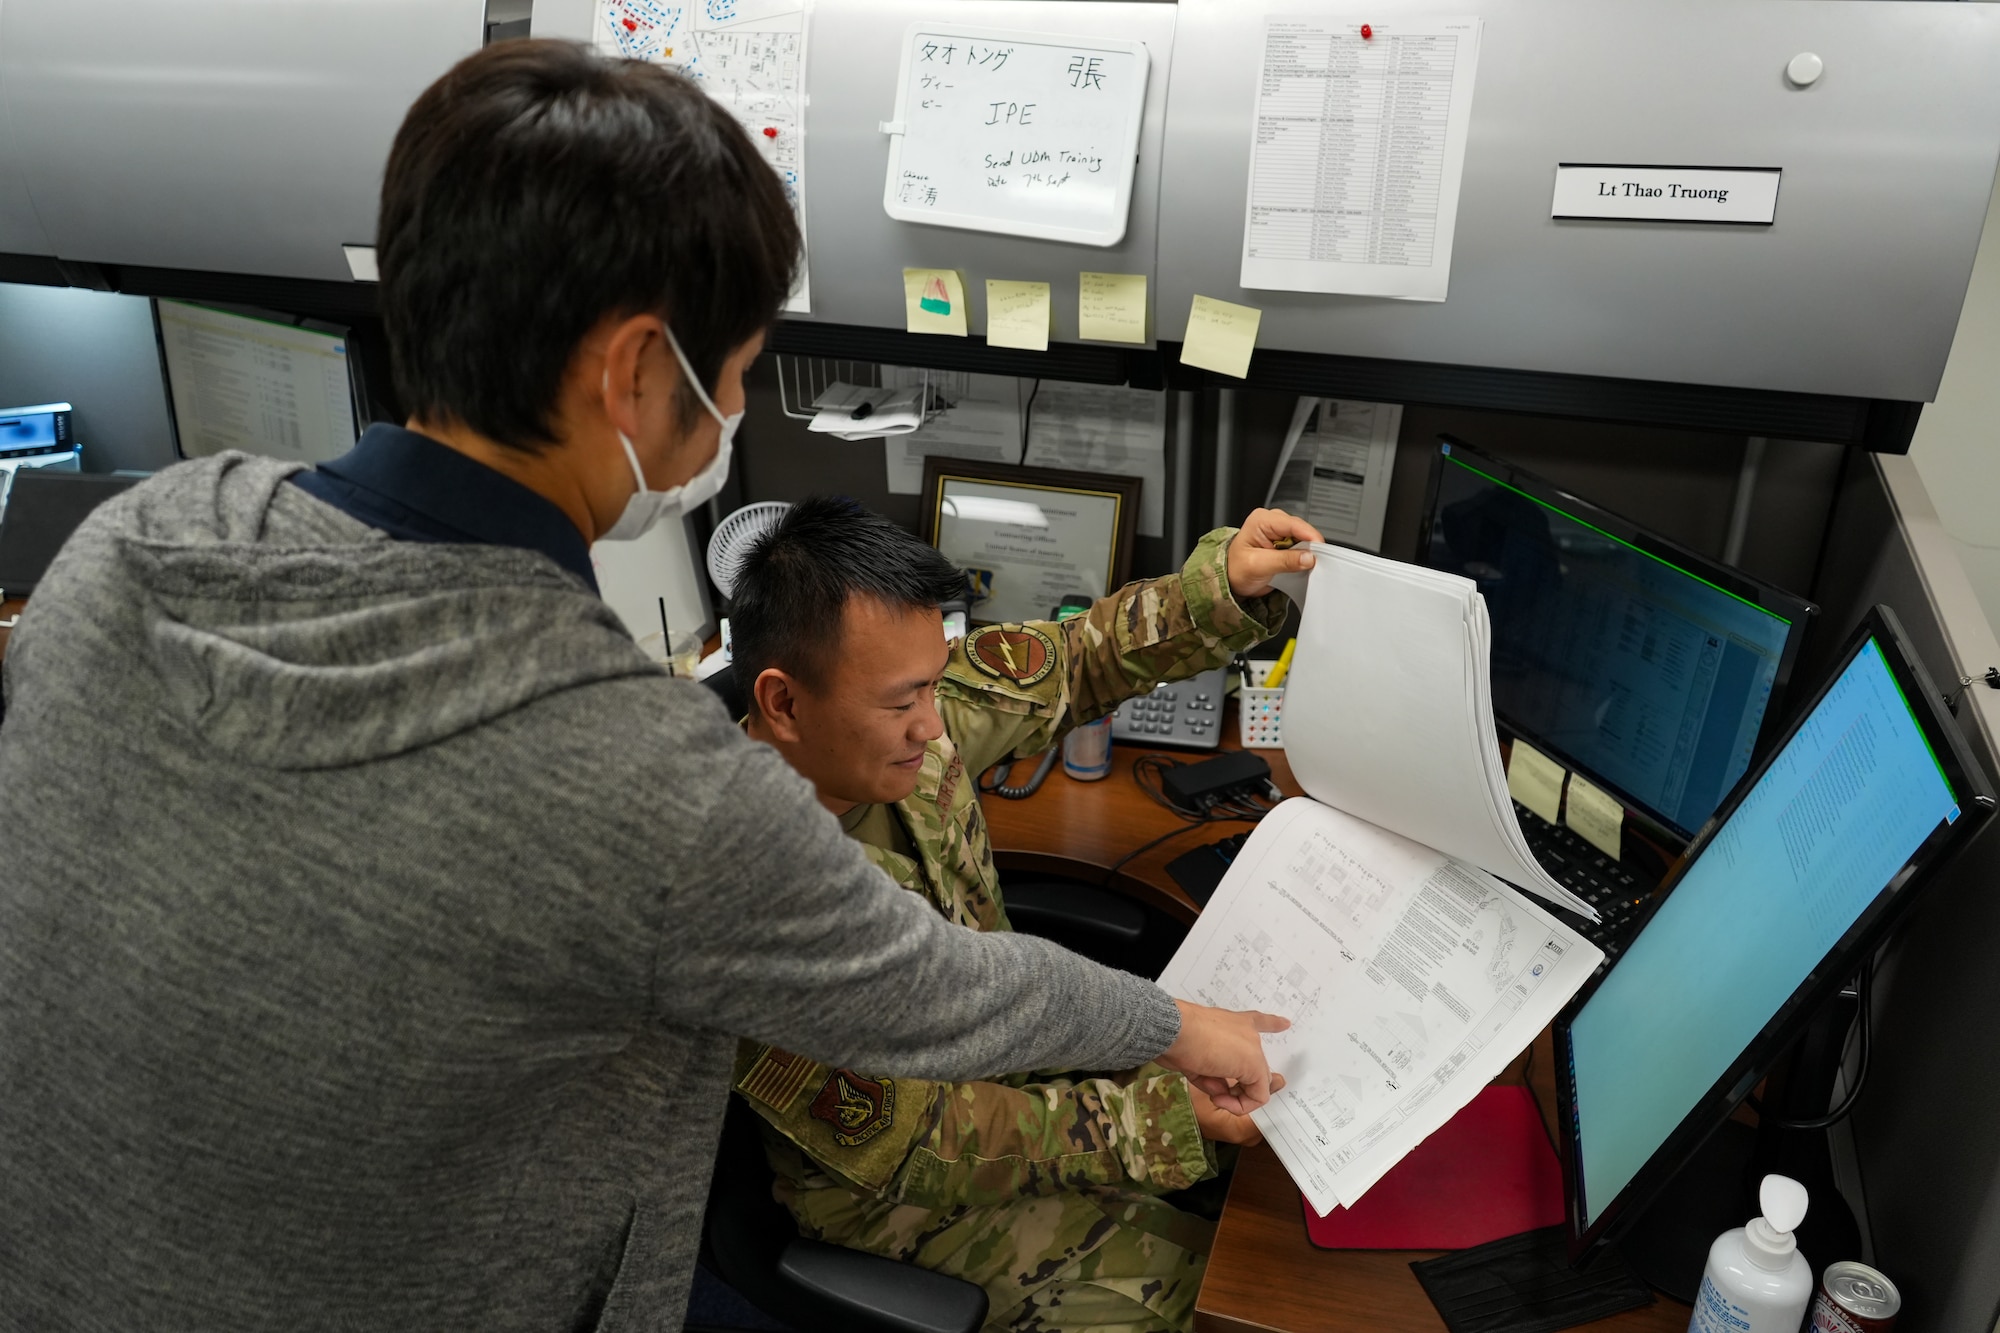 The 35th Contracting Squadron is diligently working to have a successful close out to the fiscal year. U.S. Air Force Contracting offices see an increase of requests at the end of the fiscal year.